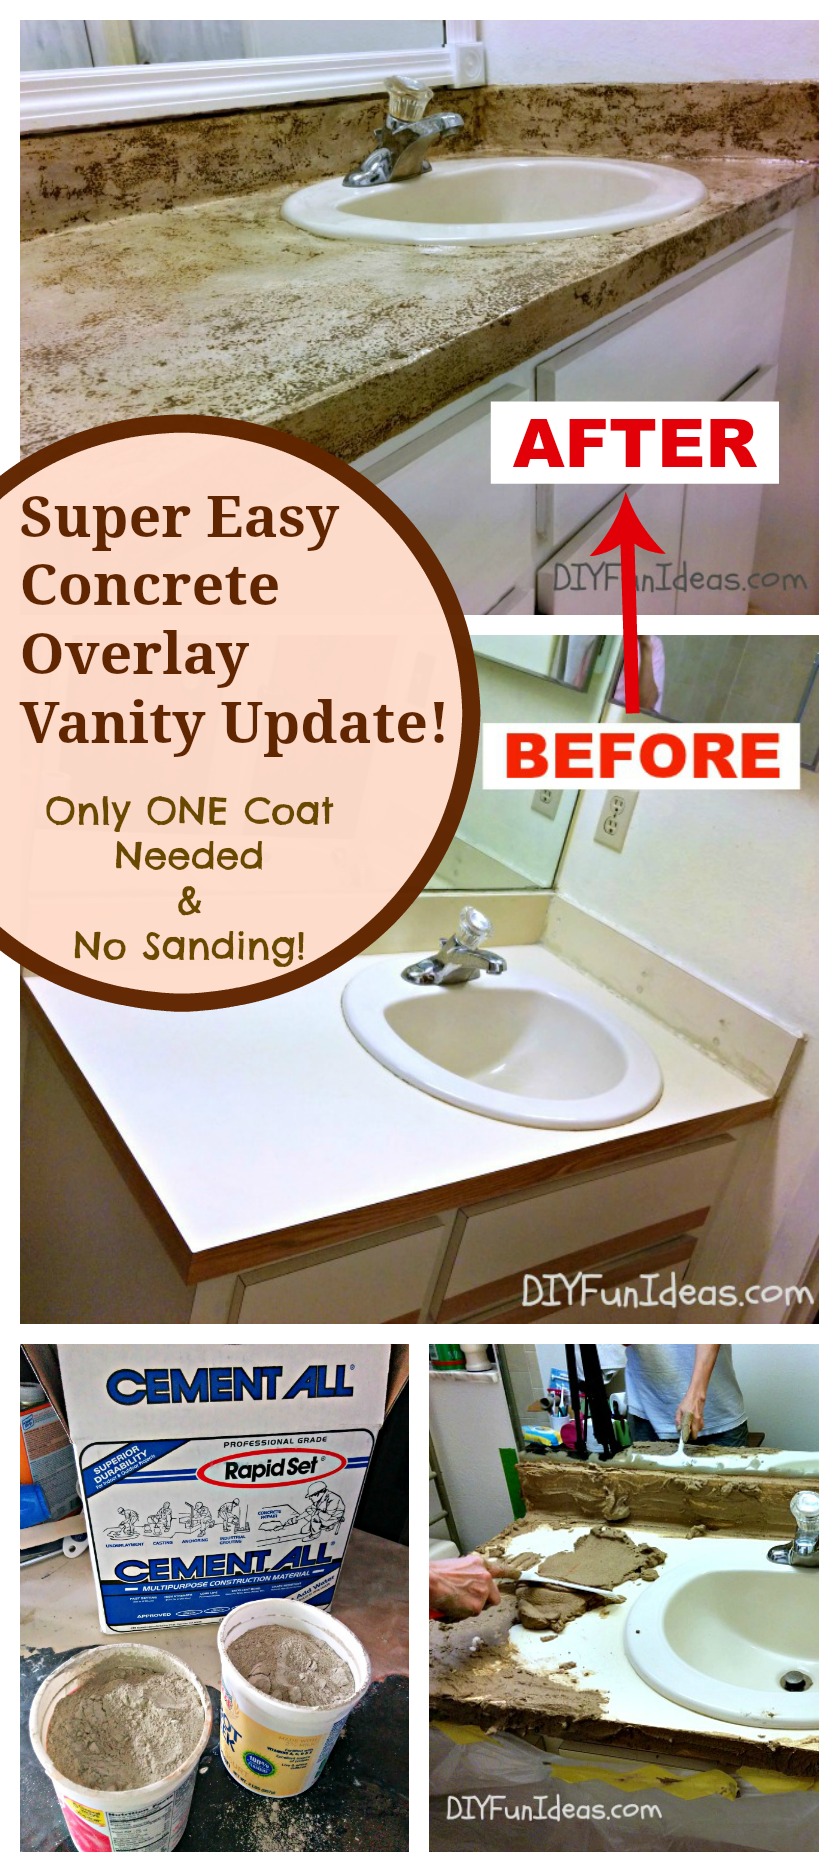 UPDATE YOUR VANITY WITH A SUPER EASY DIY CONCRETE OVERLAY